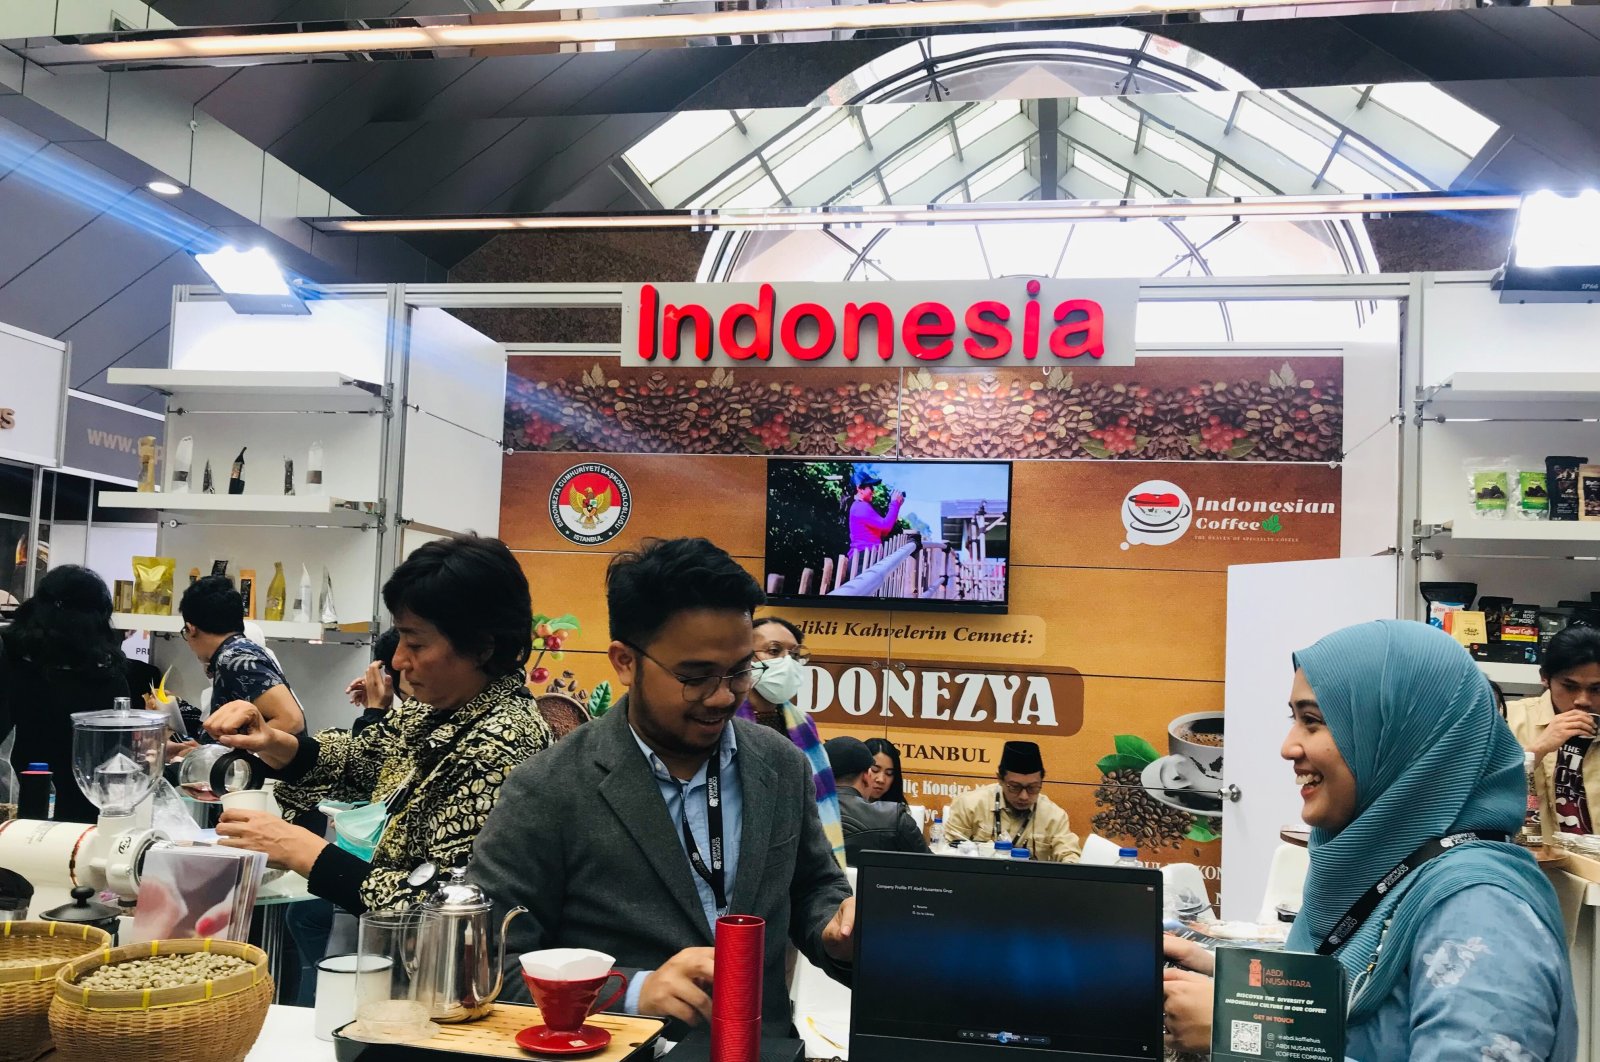 The Indonesia Pavilion at Coffex Istanbul, Istanbul, Turkey, March 17, 2022. (Photo courtesy of Buse Keskin)